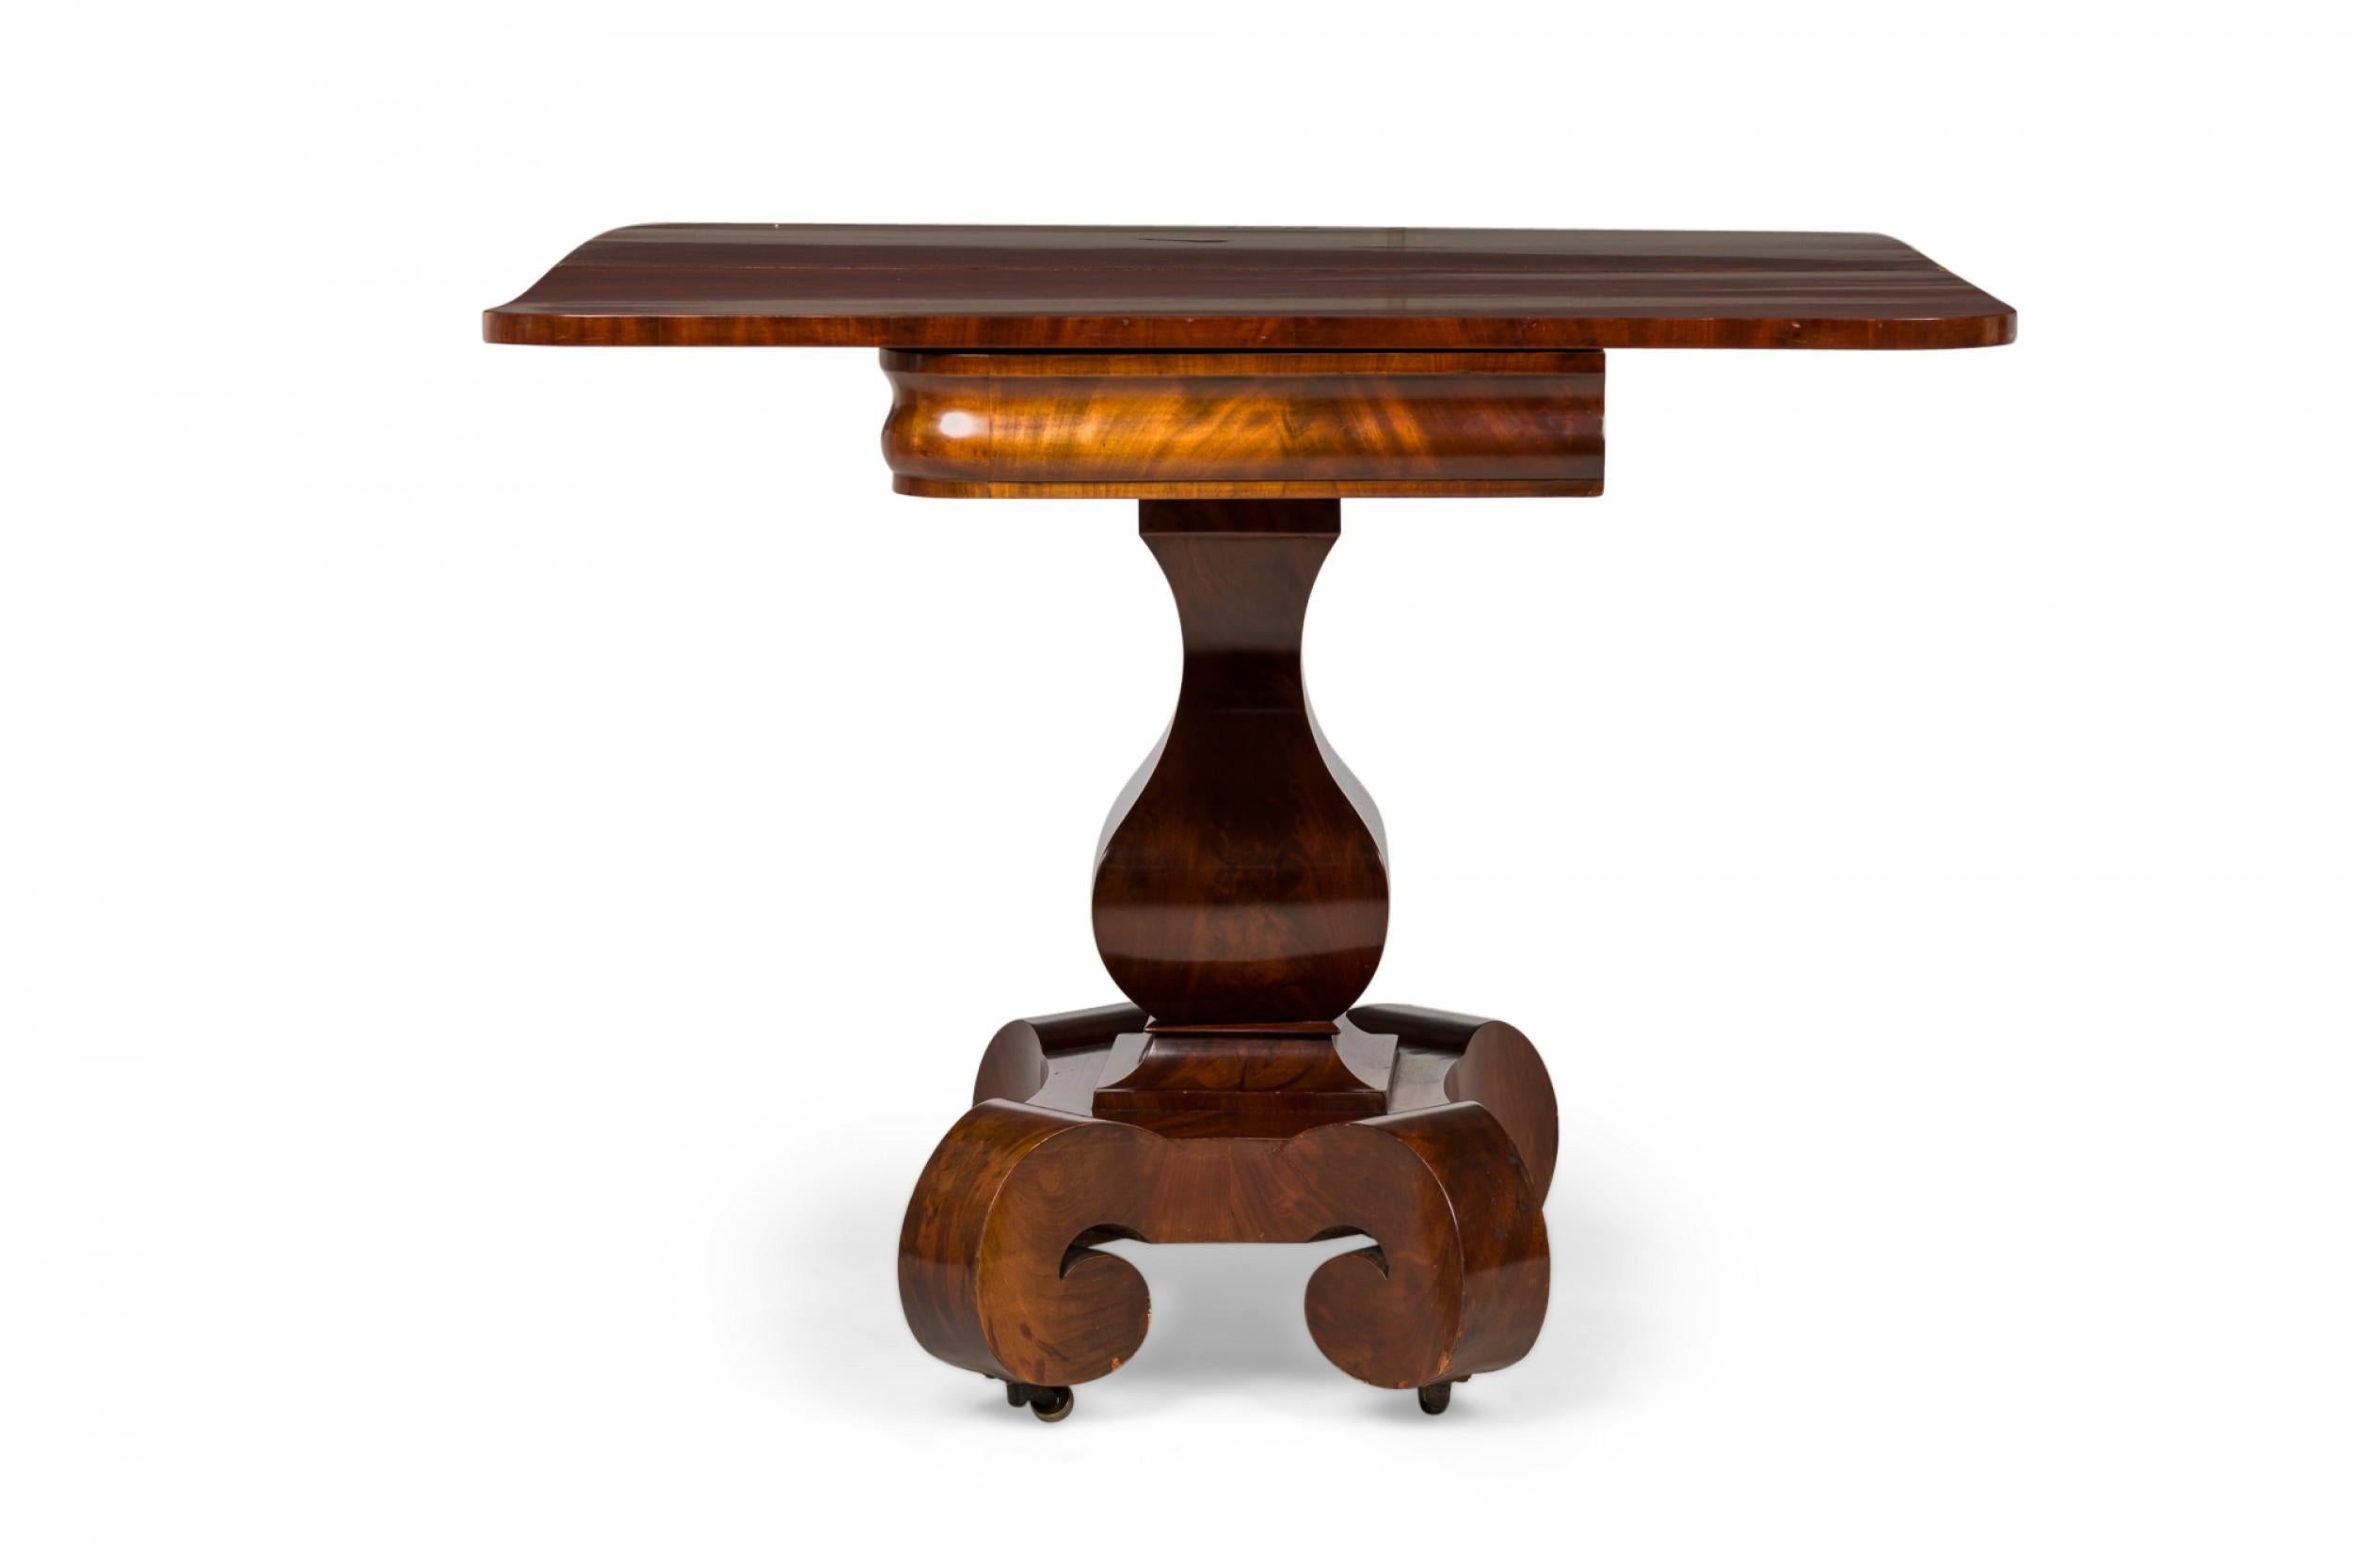 19th Century American Empire Expanding Rectangular Wood Side Table with Mahogany Veneer For Sale